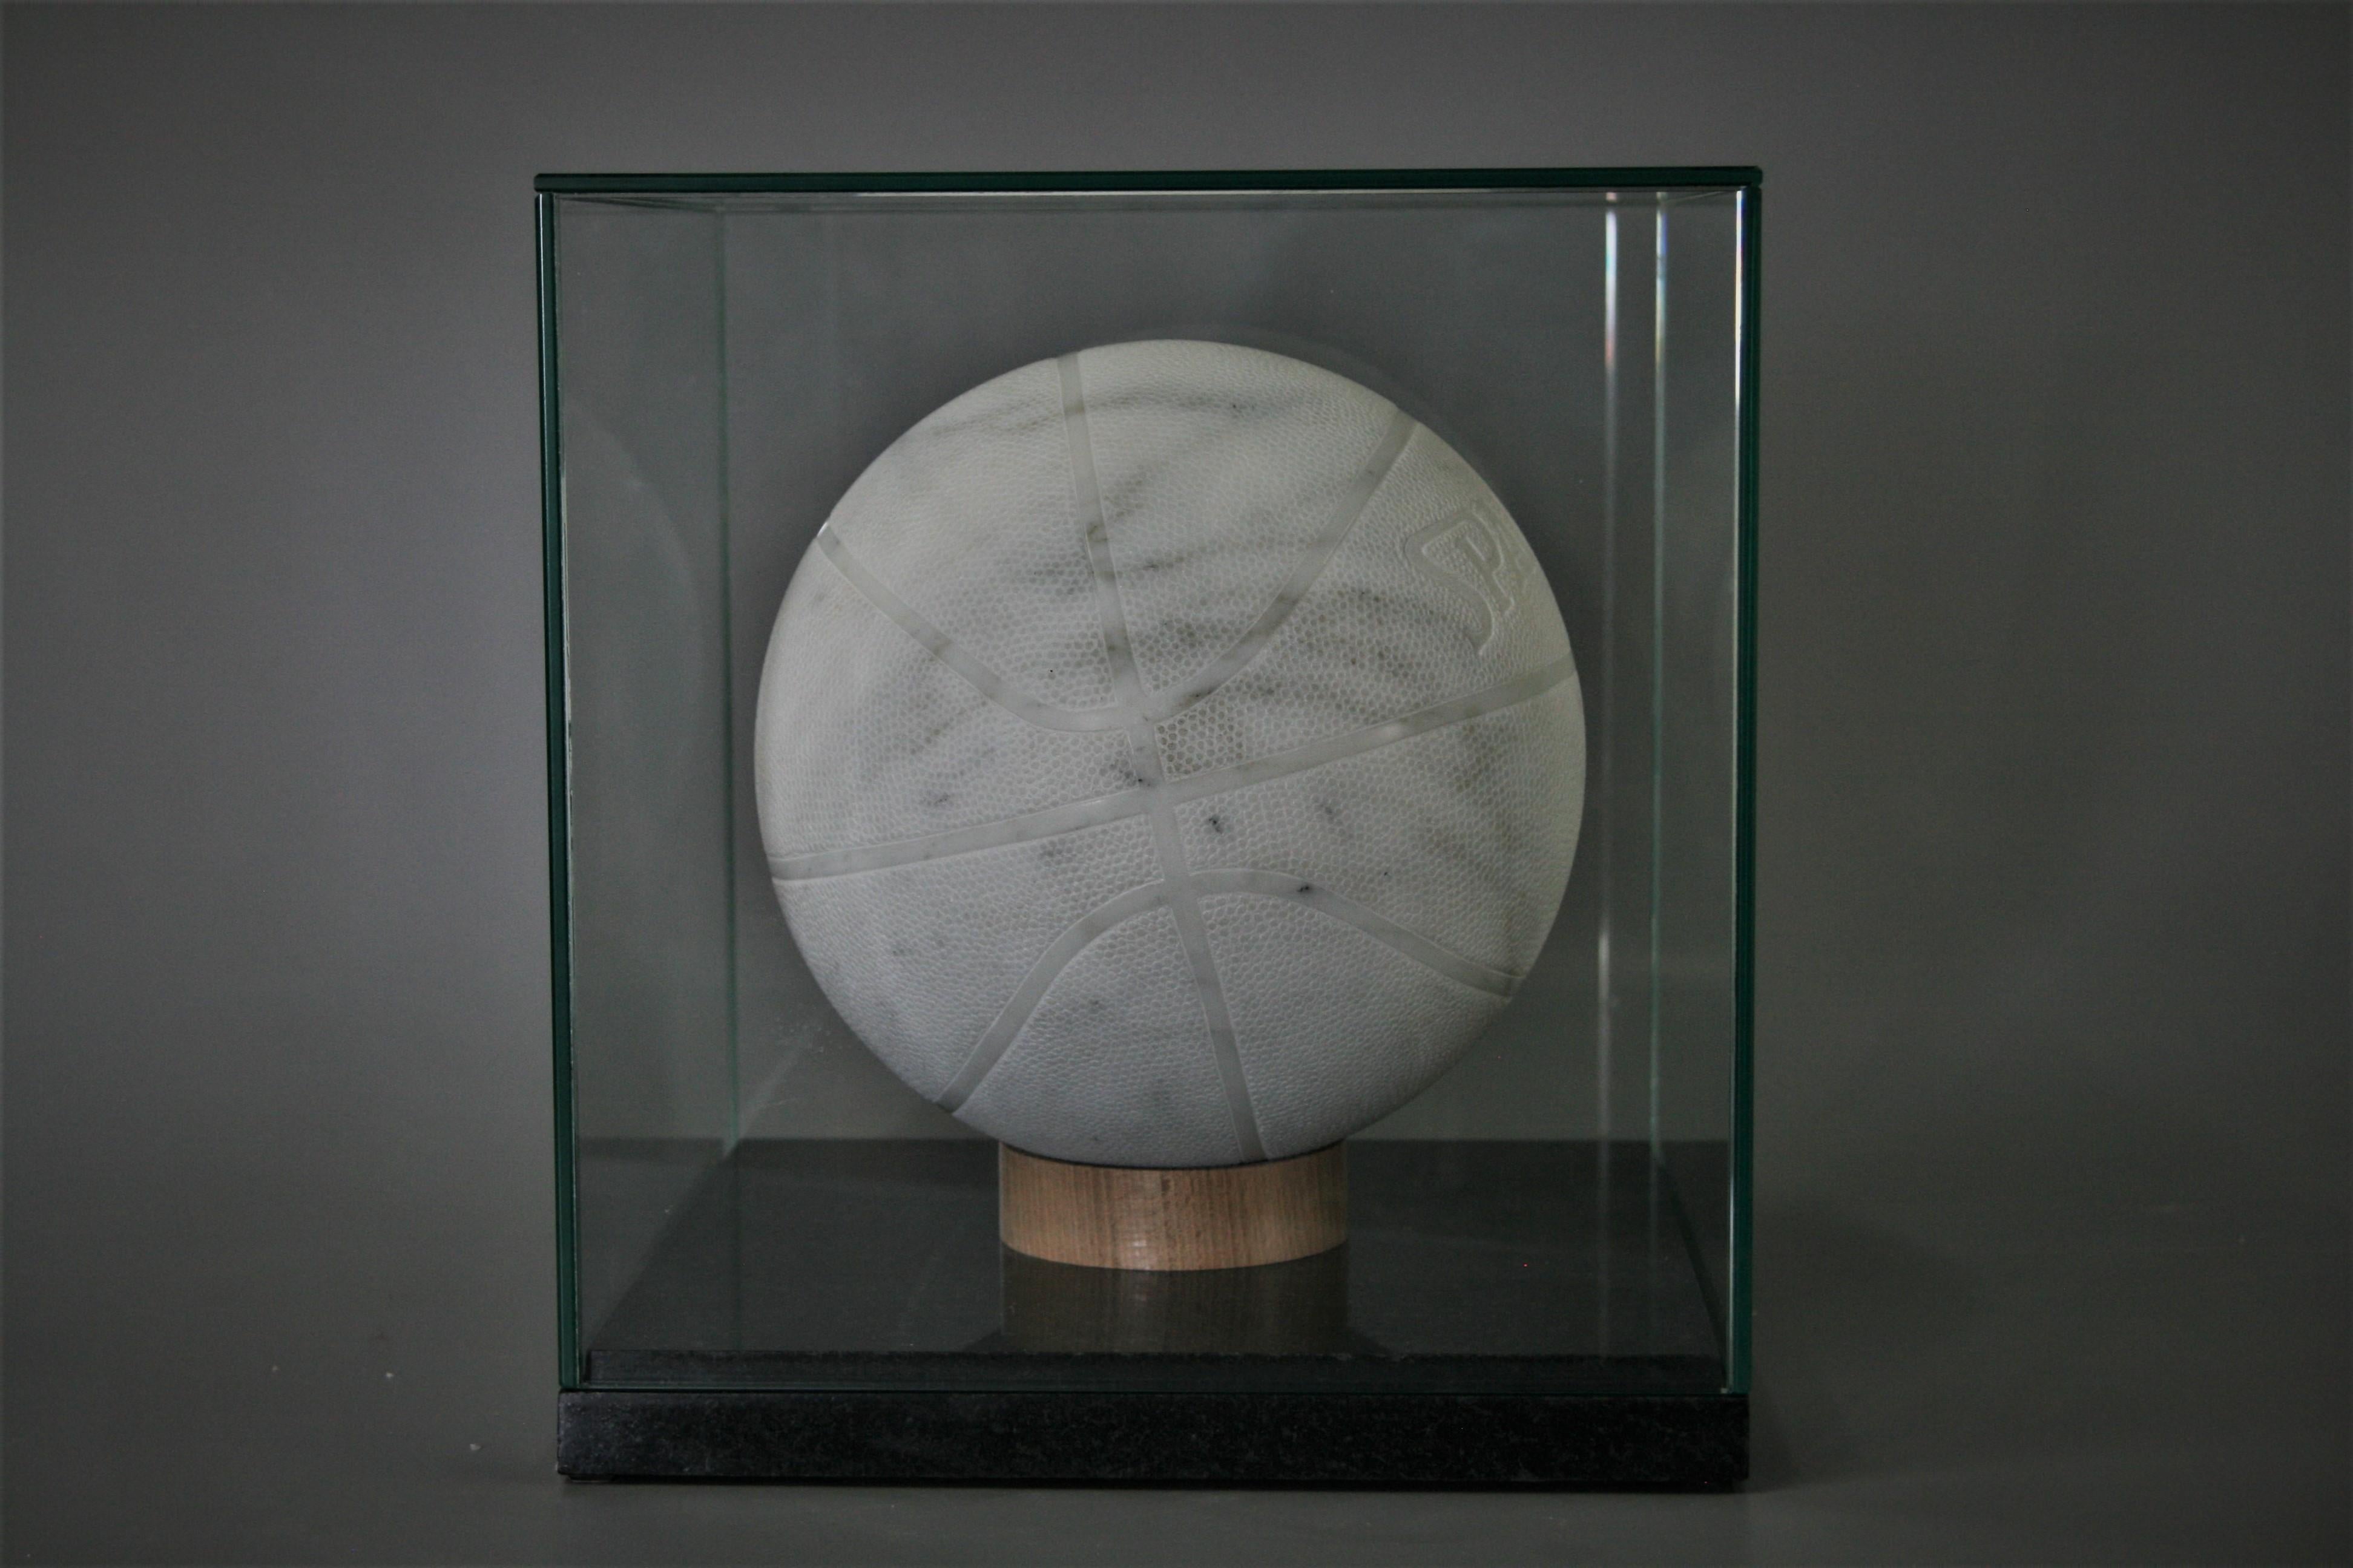 This marble sculpture is hand carved with Carrara Statuario marble! 
The Ball is available either with or without the showcase. Also the bottom of the showcase can be made in any color of stone or wood. The Sculpture and the Showcase are packed in